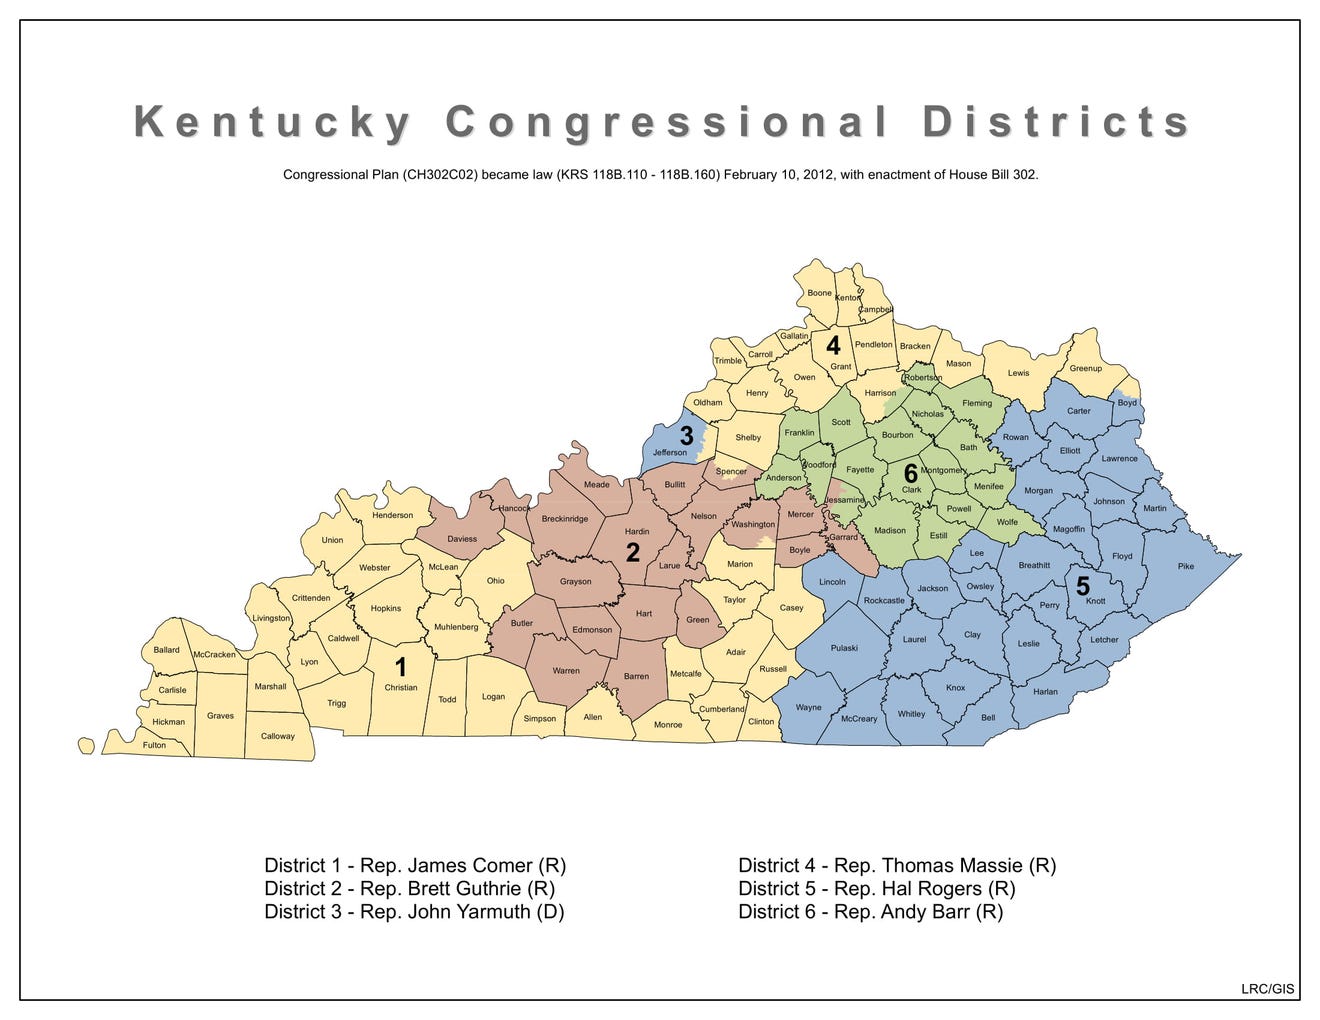 KY Senate GOP unveils redistricting plan for Congress, Yarmuth's seat